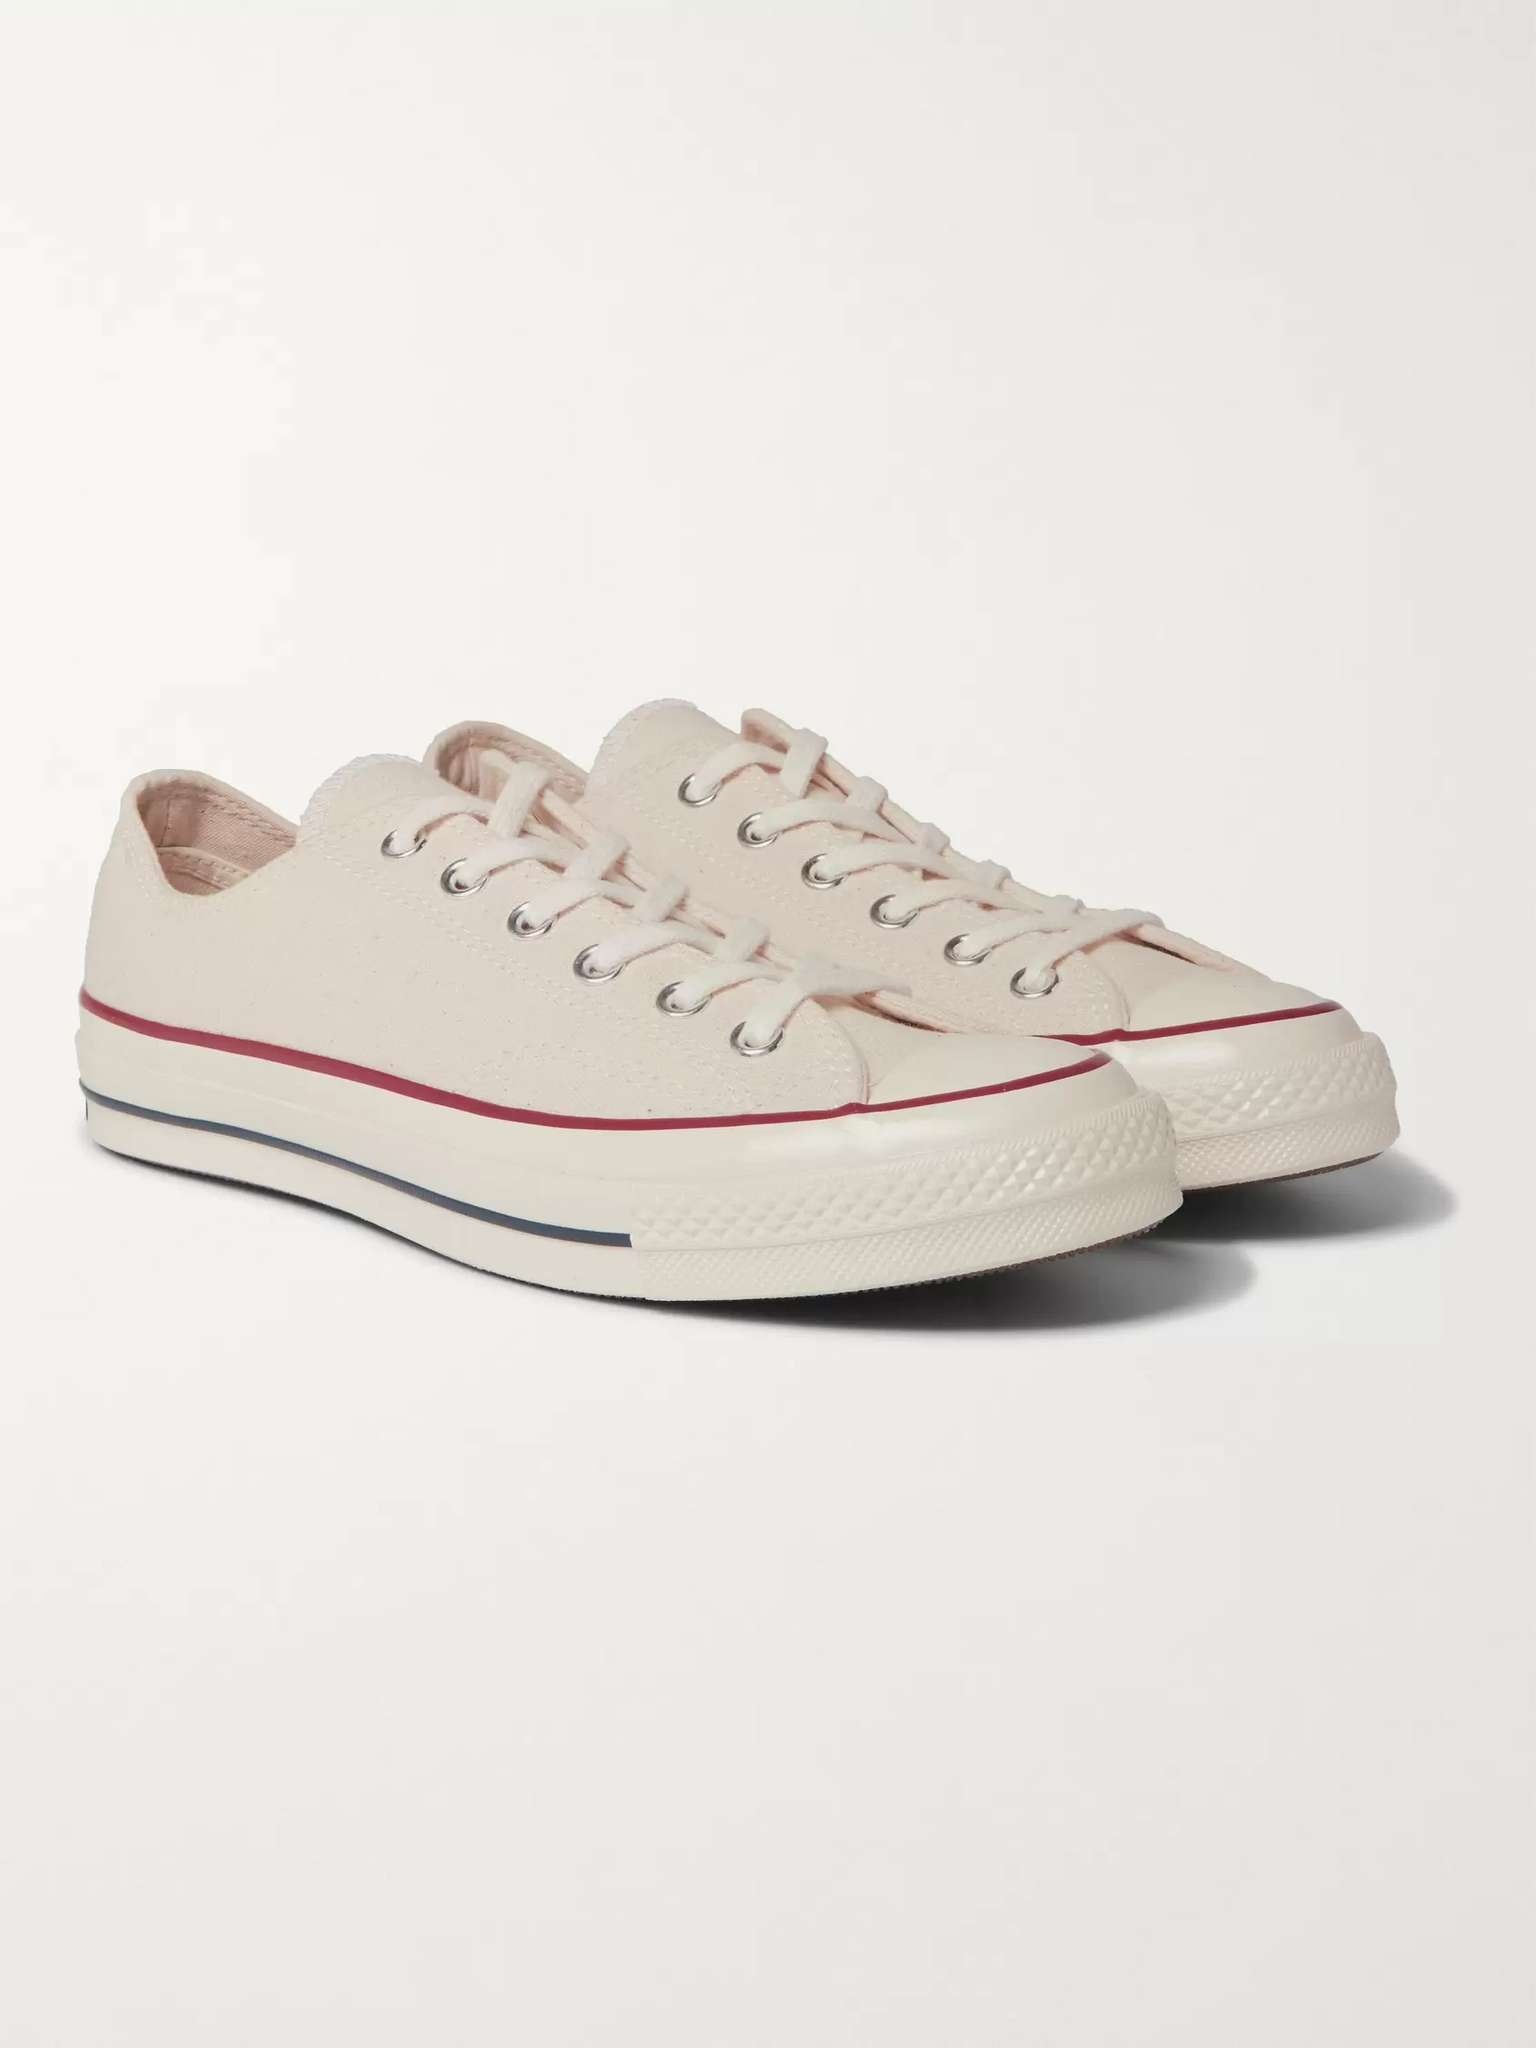 1970s Chuck Taylor All Star Canvas Sneakers - 4